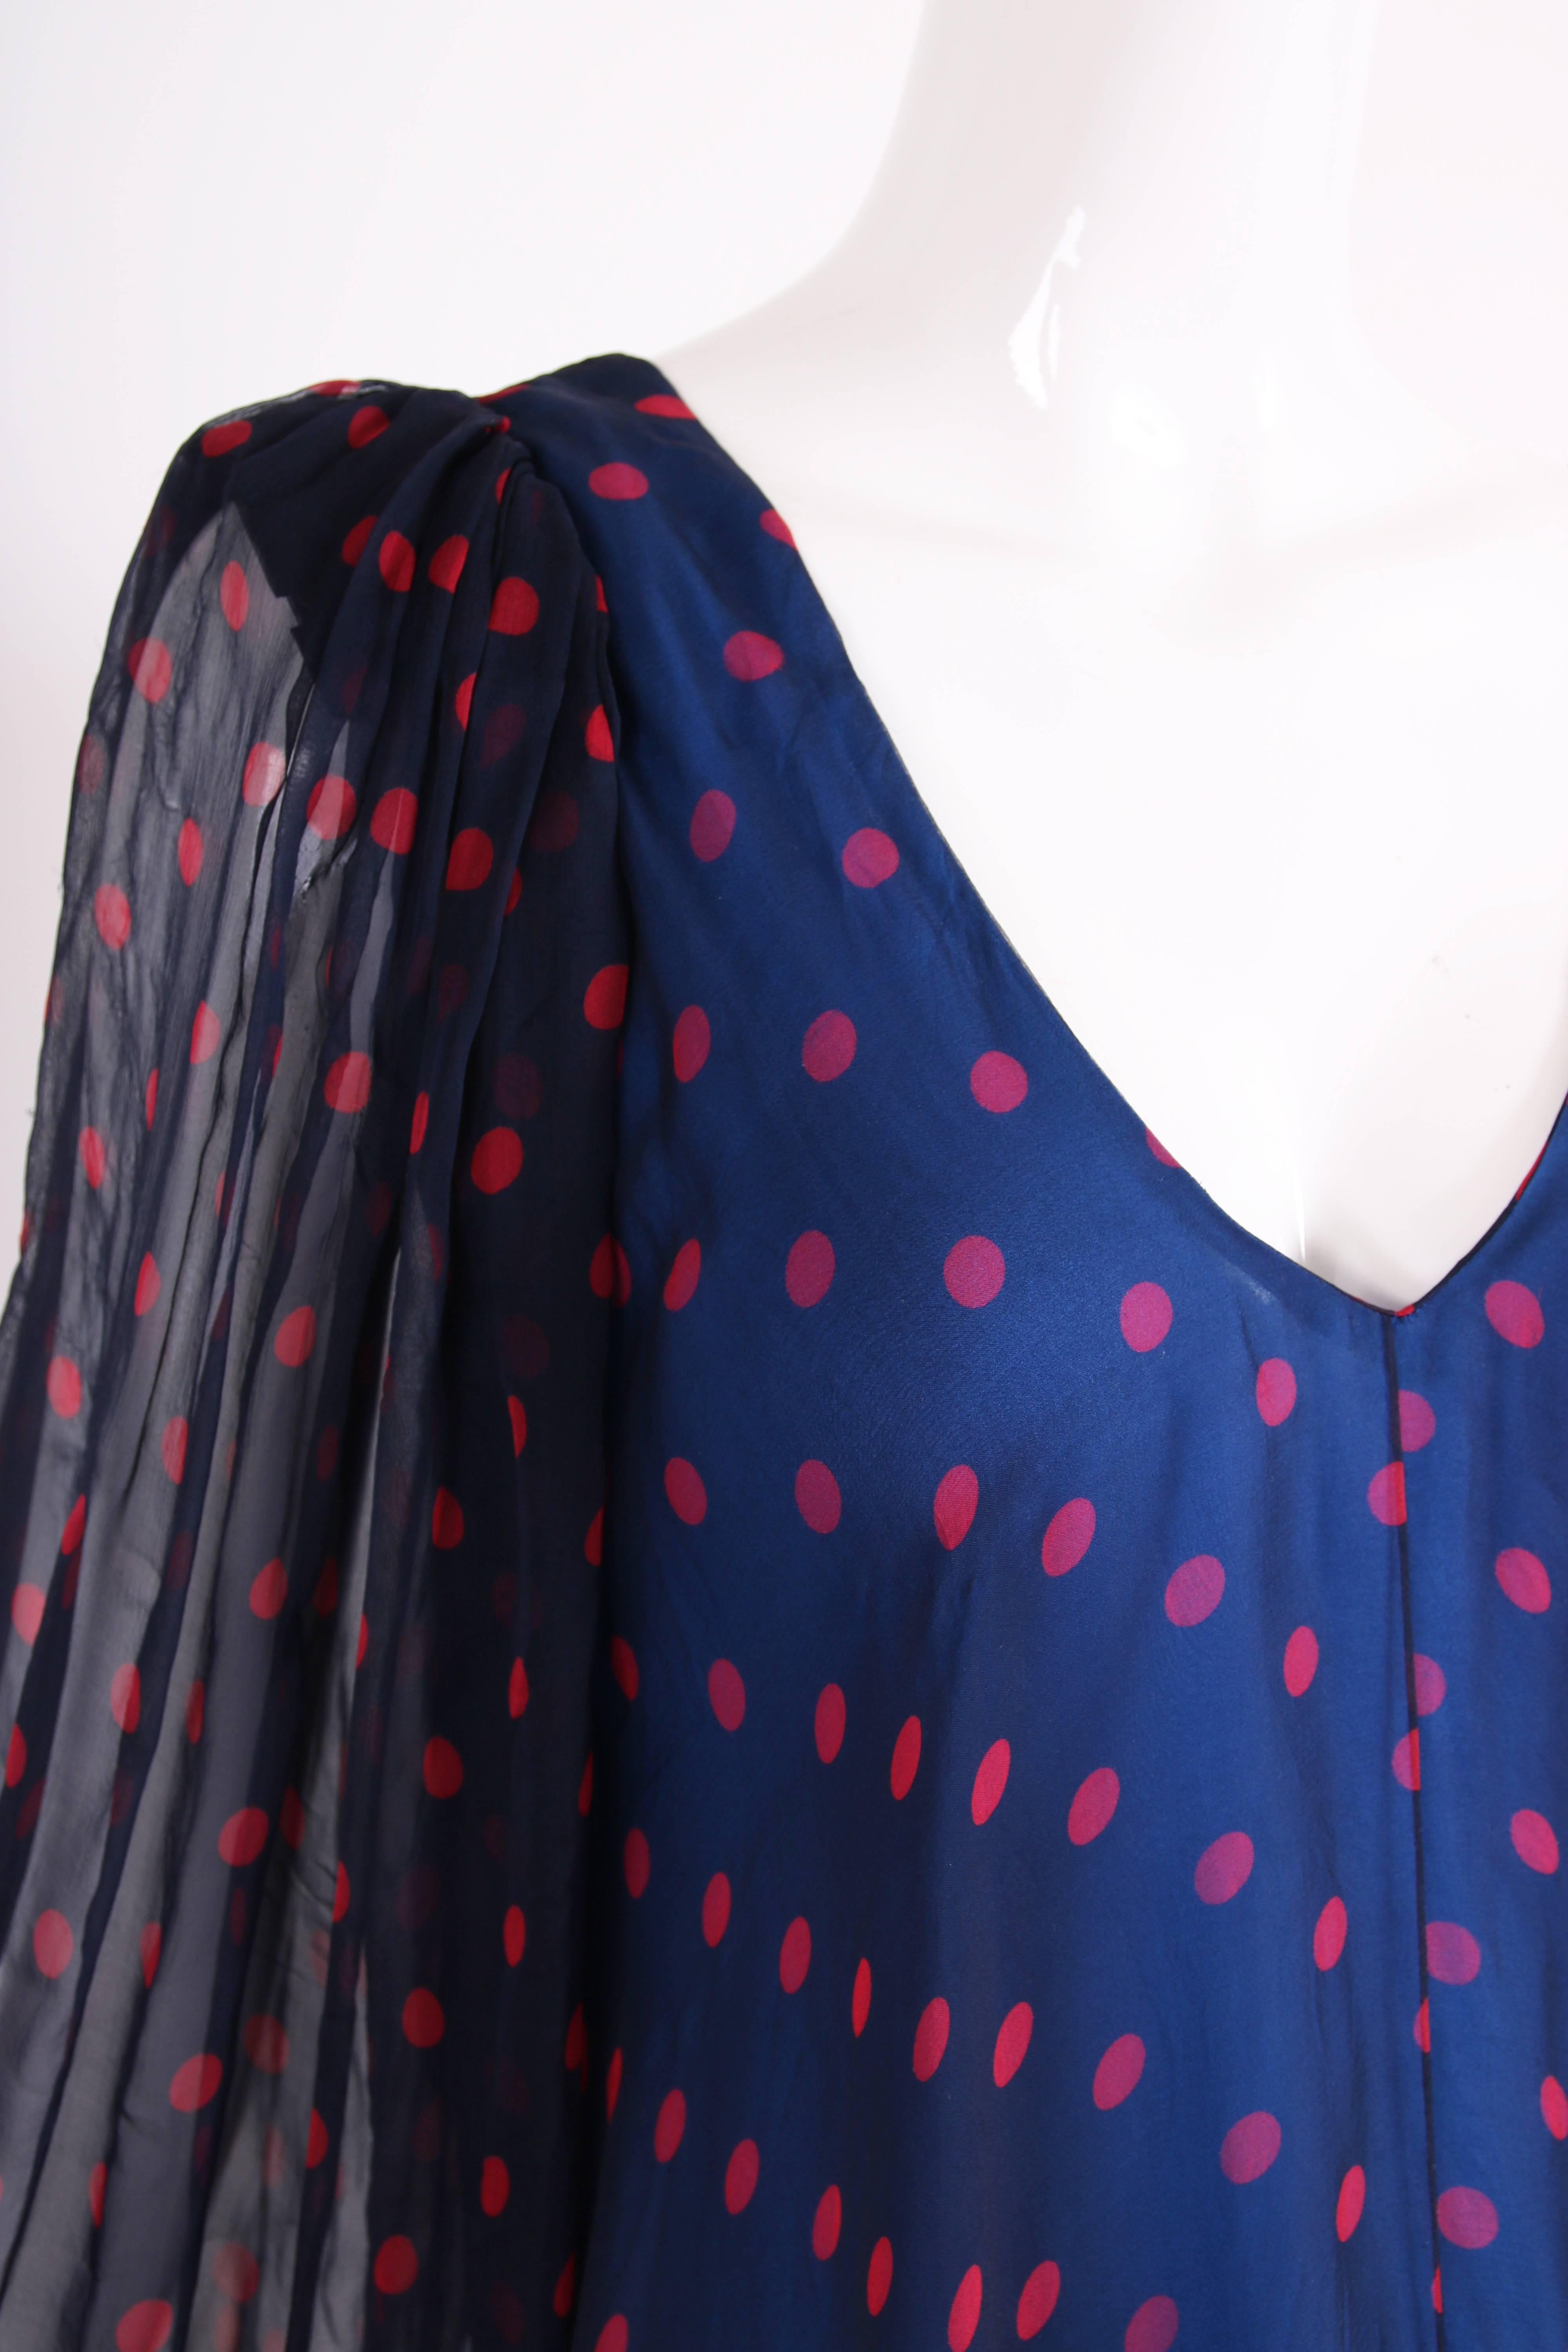 Women's 1970s Stavropoulos Silk Chiffon Polka Dot Cocktail Dress with Sheer Sleeves